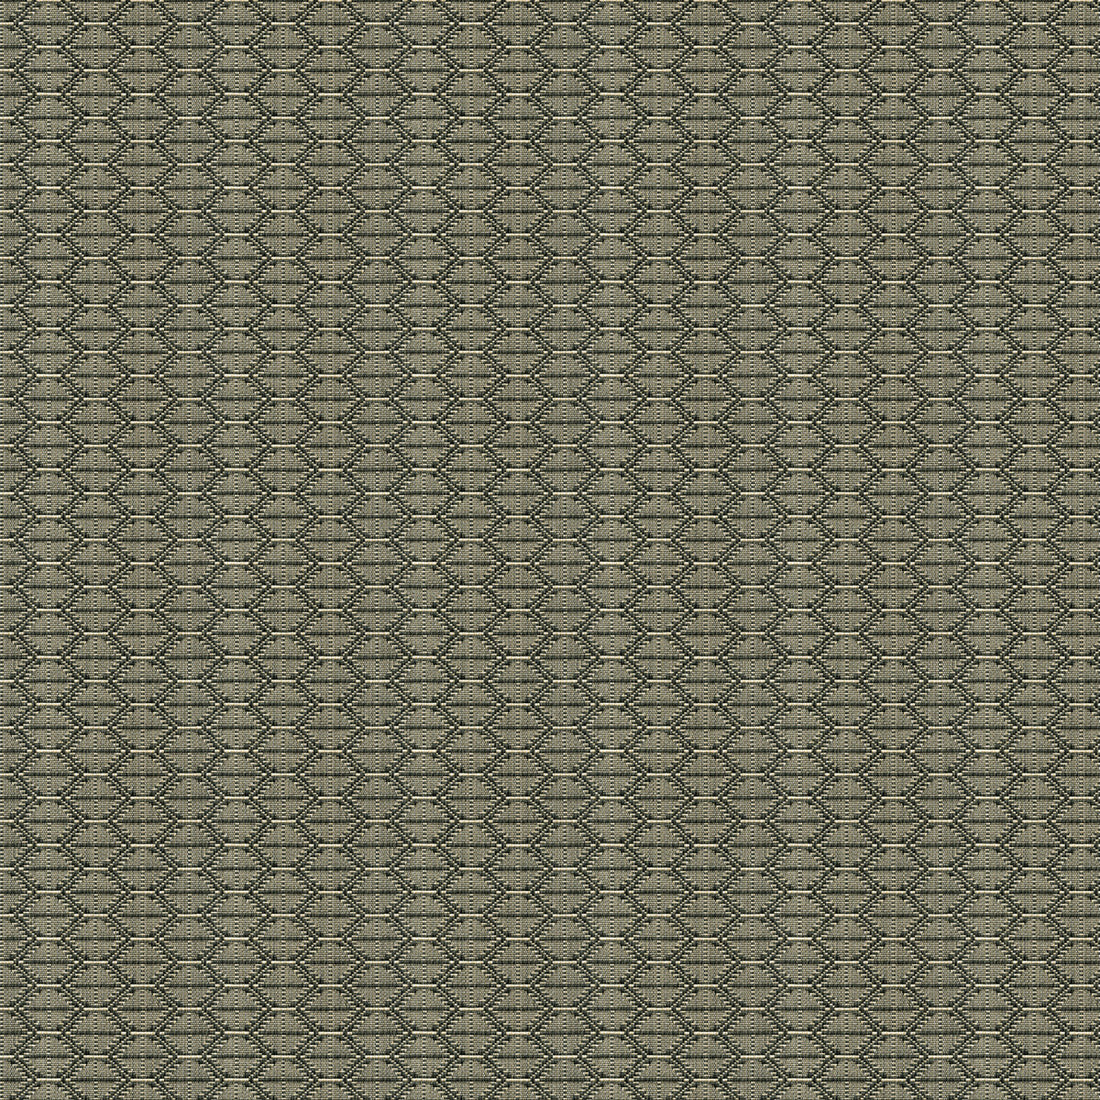 Nzuri fabric in thunder color - pattern 33862.1621.0 - by Kravet Contract in the Tanzania J Banks collection